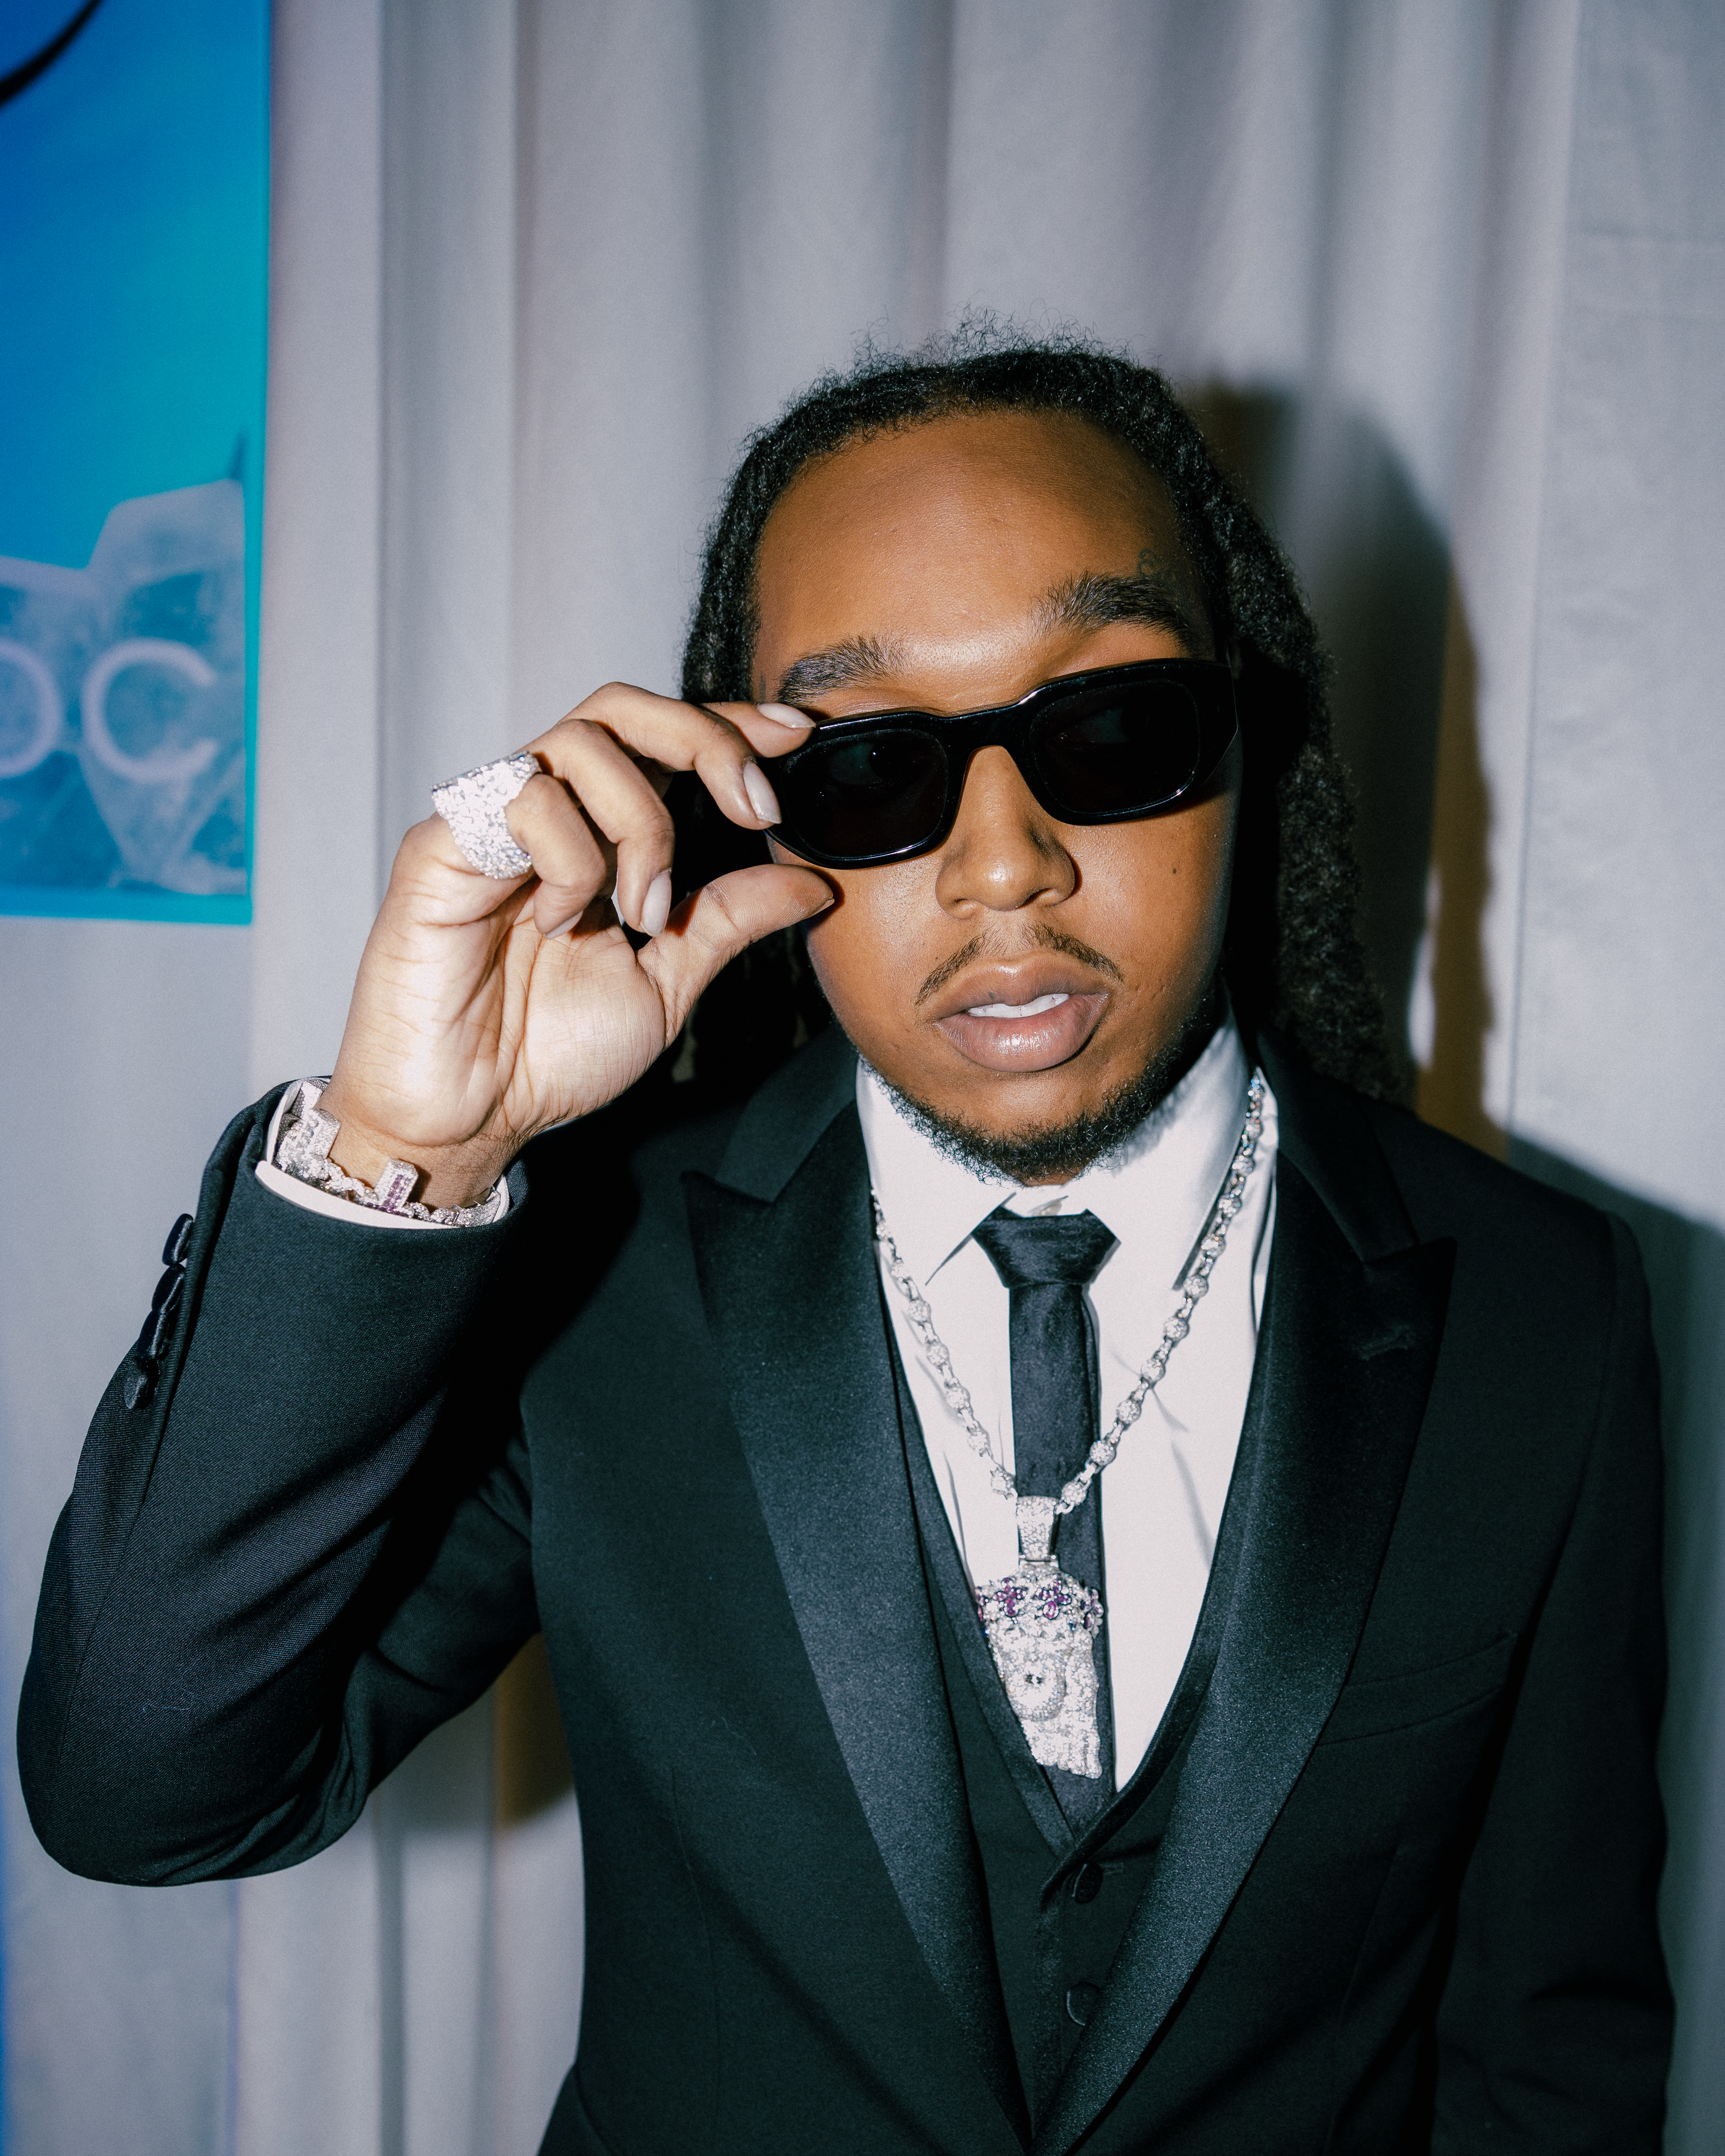 What to Know About Takeoff’s Funeral Service in Atlanta